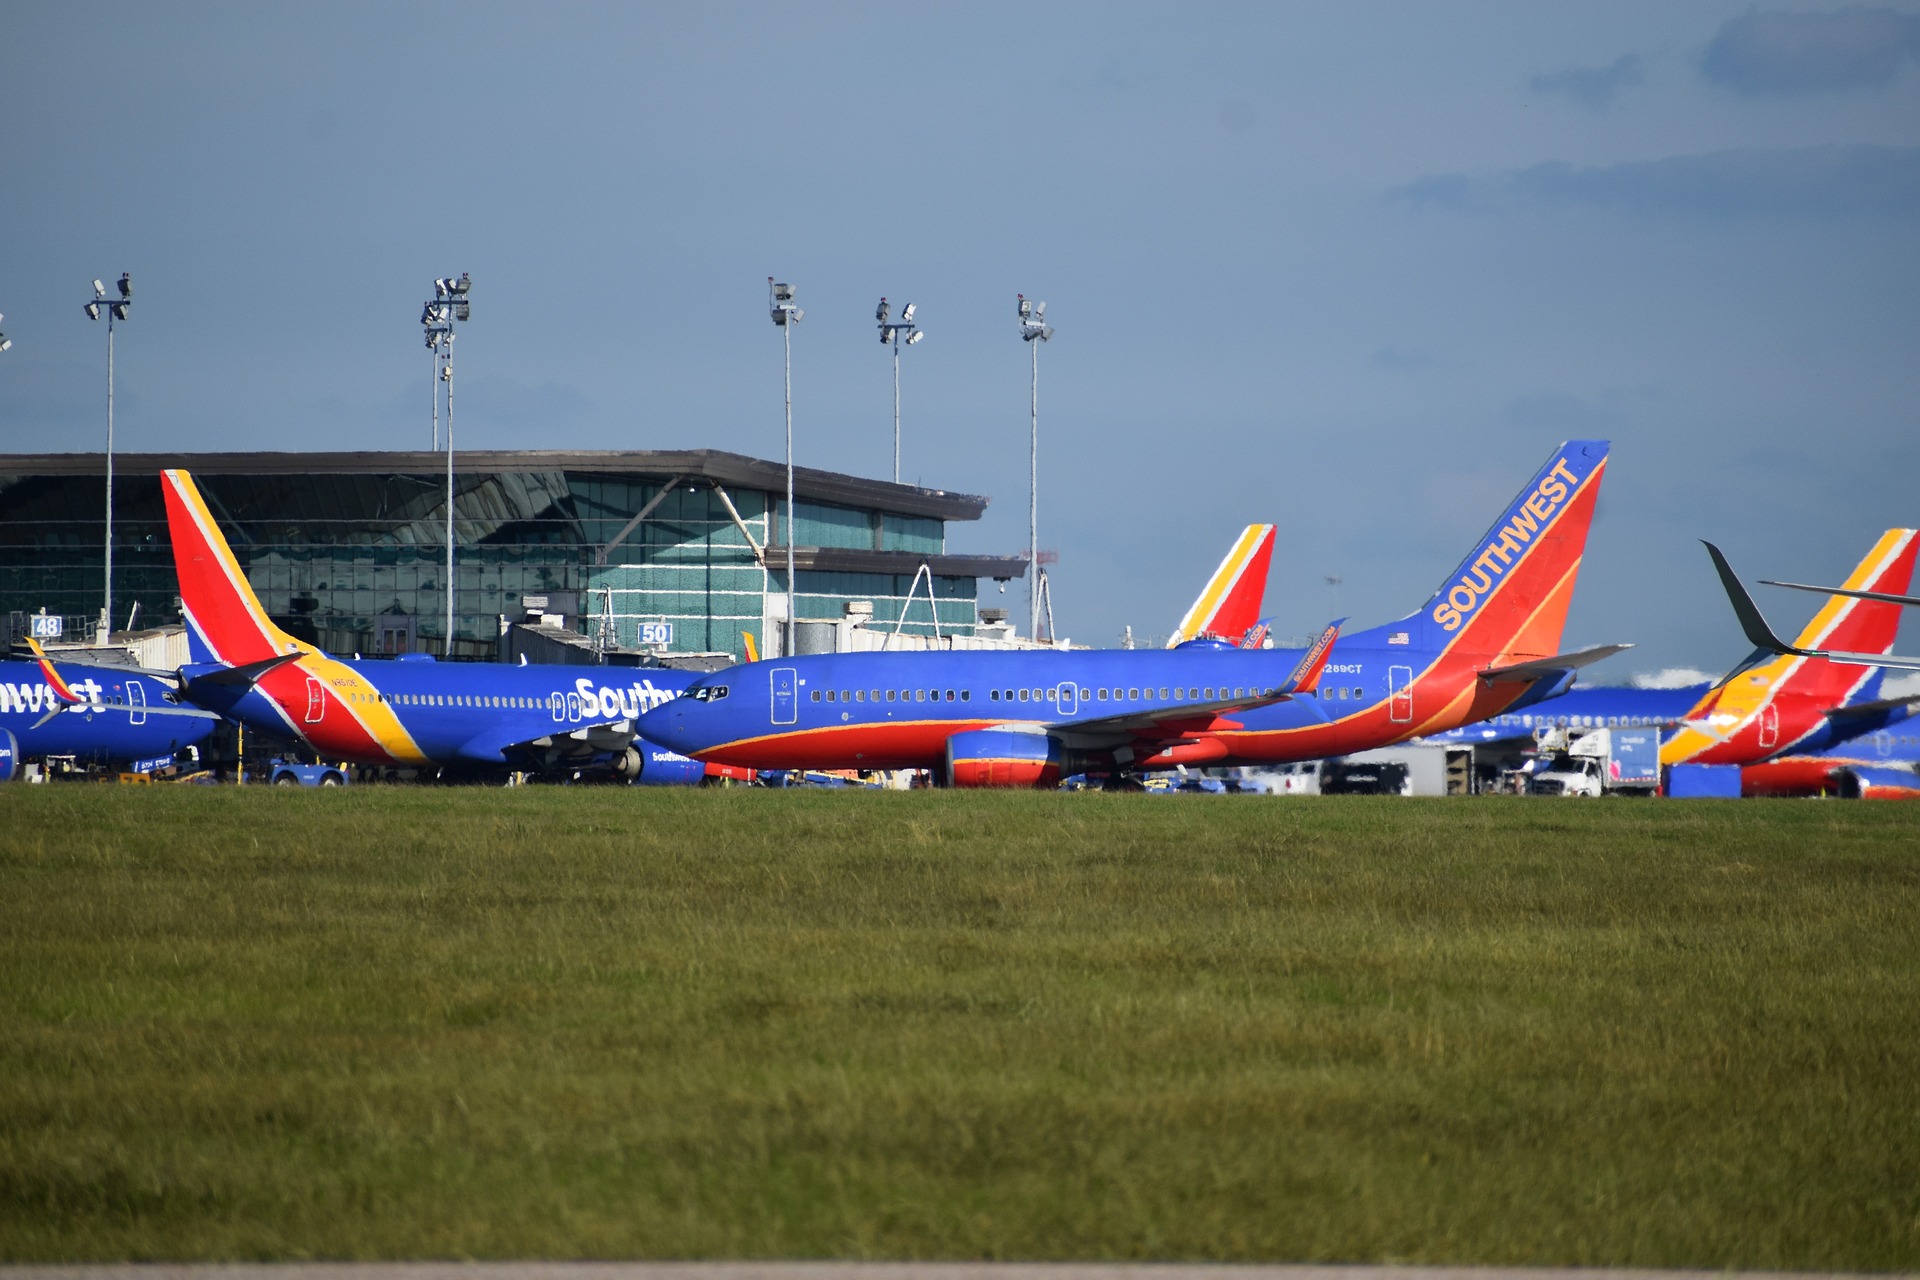 Southwest Airlines announces Wanna Go Wednesdays for the lowest fares